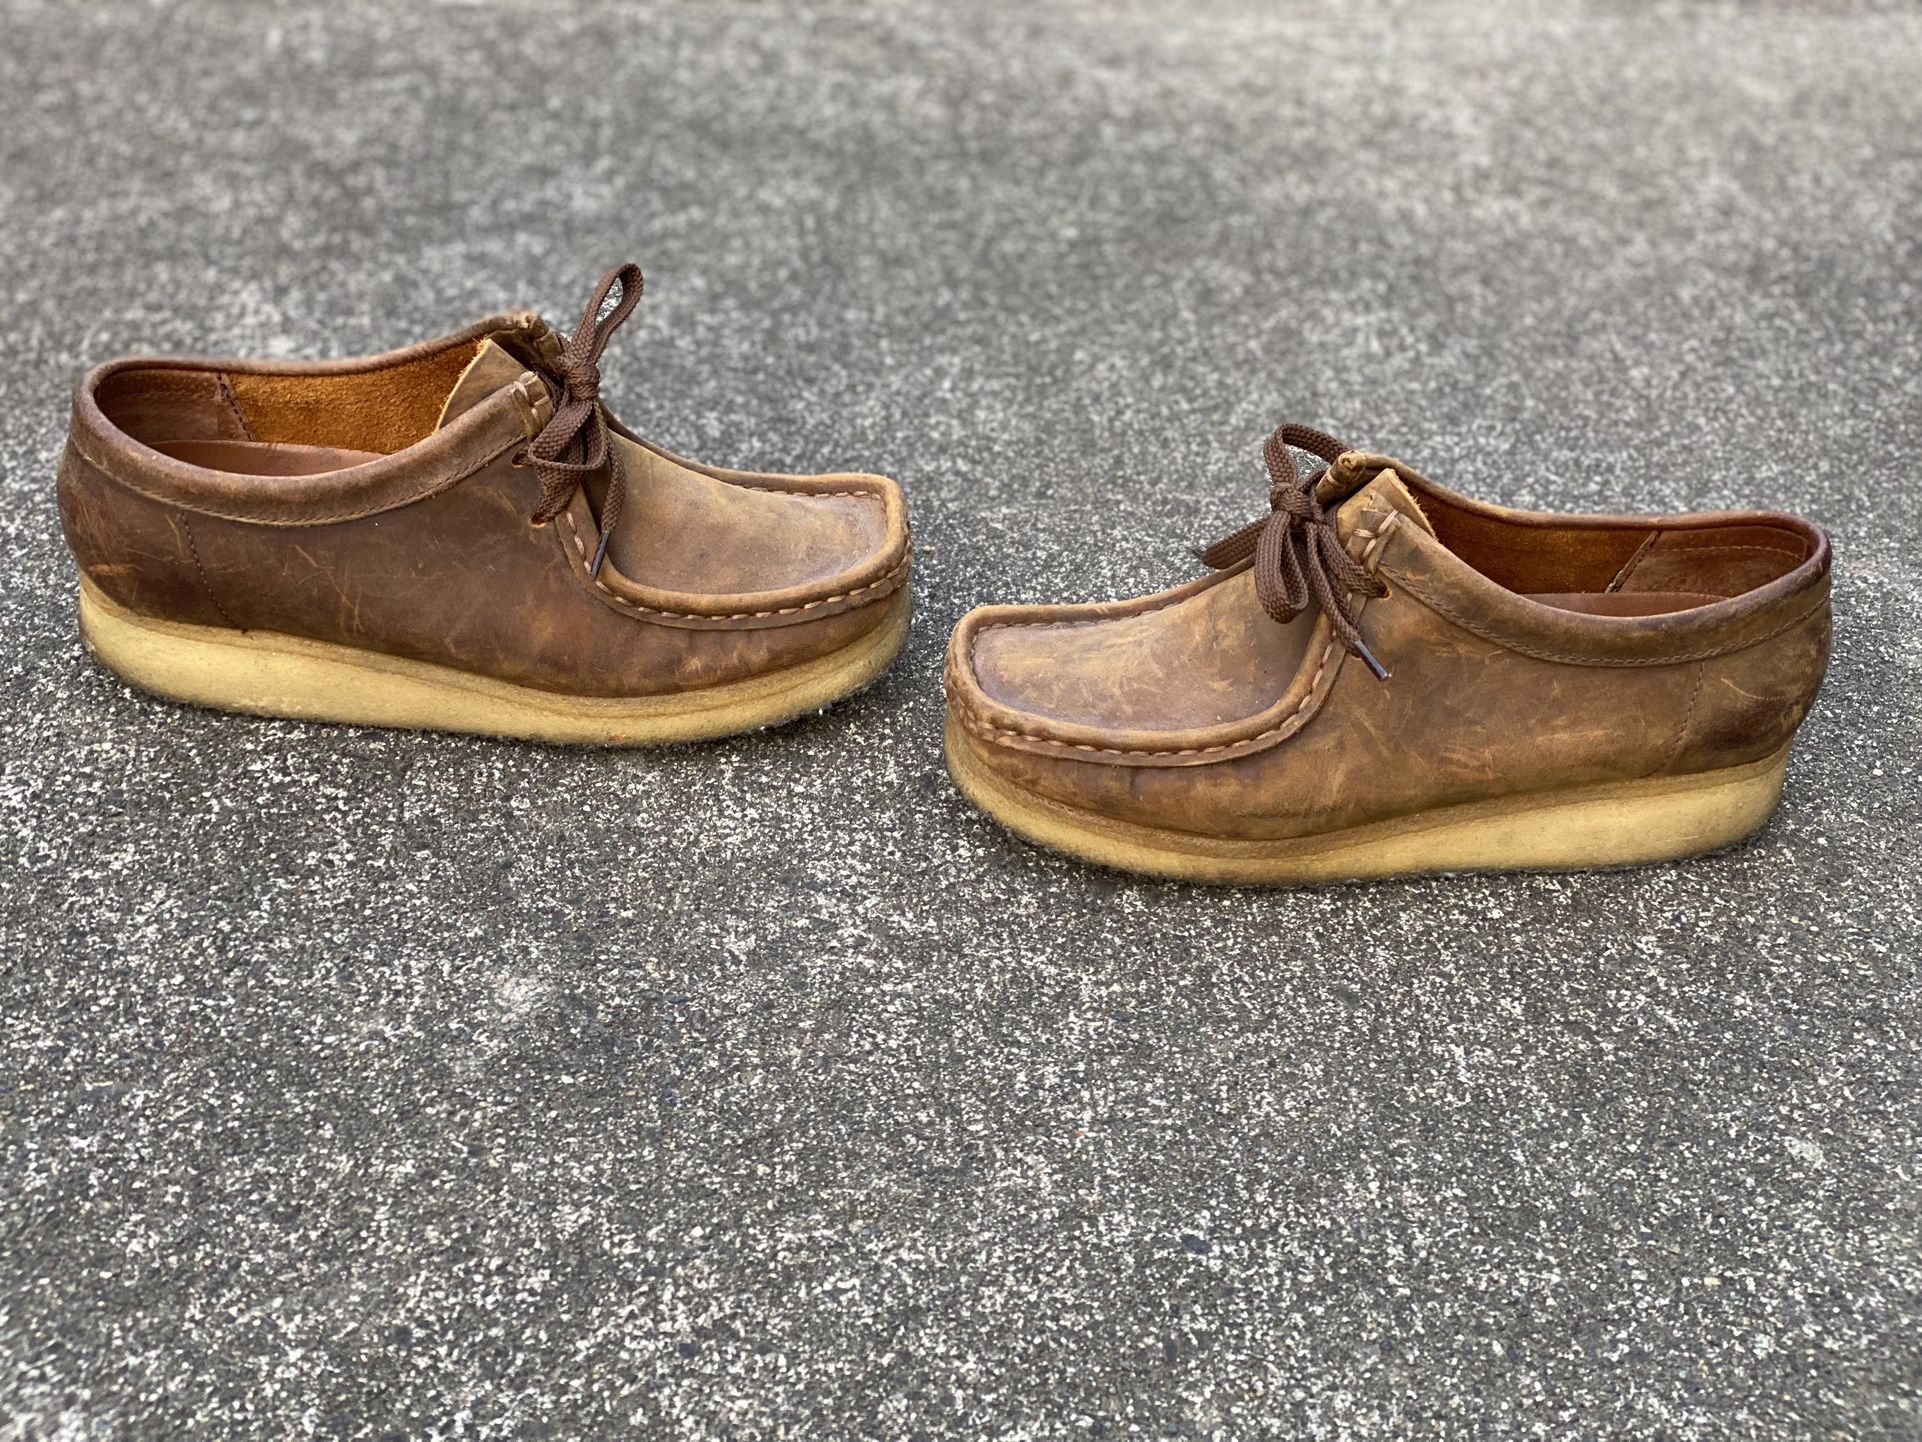 CLARKS ORIGINALS LADIES BROWN DISTRESSED LEATHER WALLABEE 7 1/2 M for Sale in Puyallup, WA